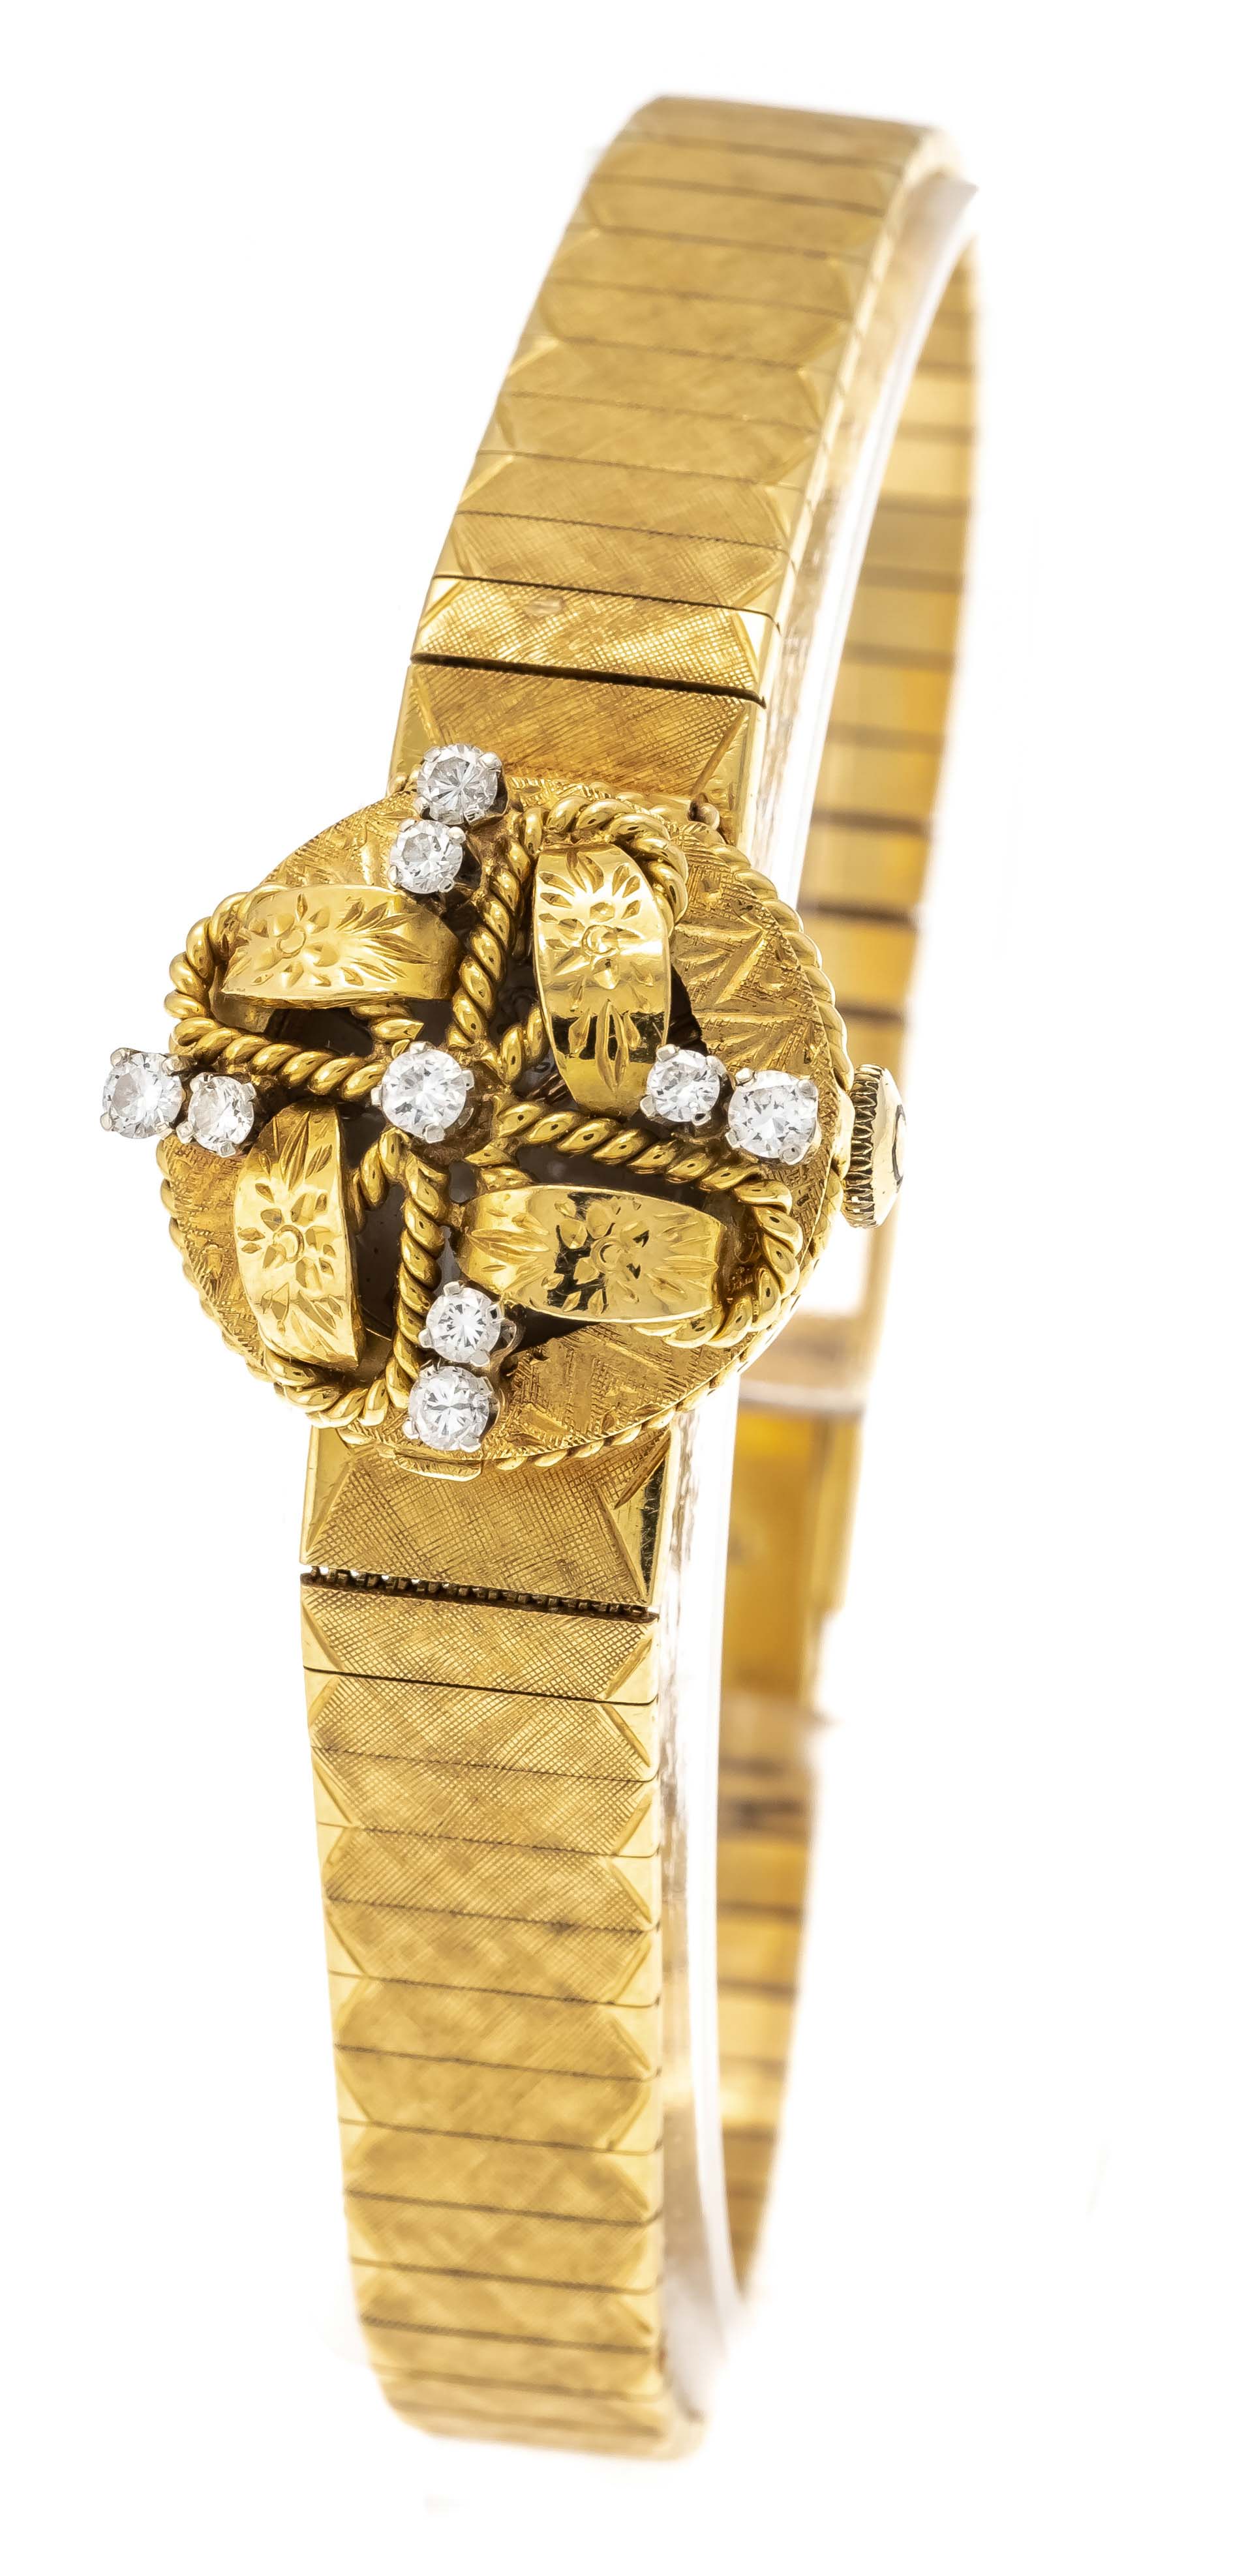 Omega ladies' watch, GG 750/000, jewellery cover with brilliant-cut diamonds in a diamond-setting - Image 6 of 9